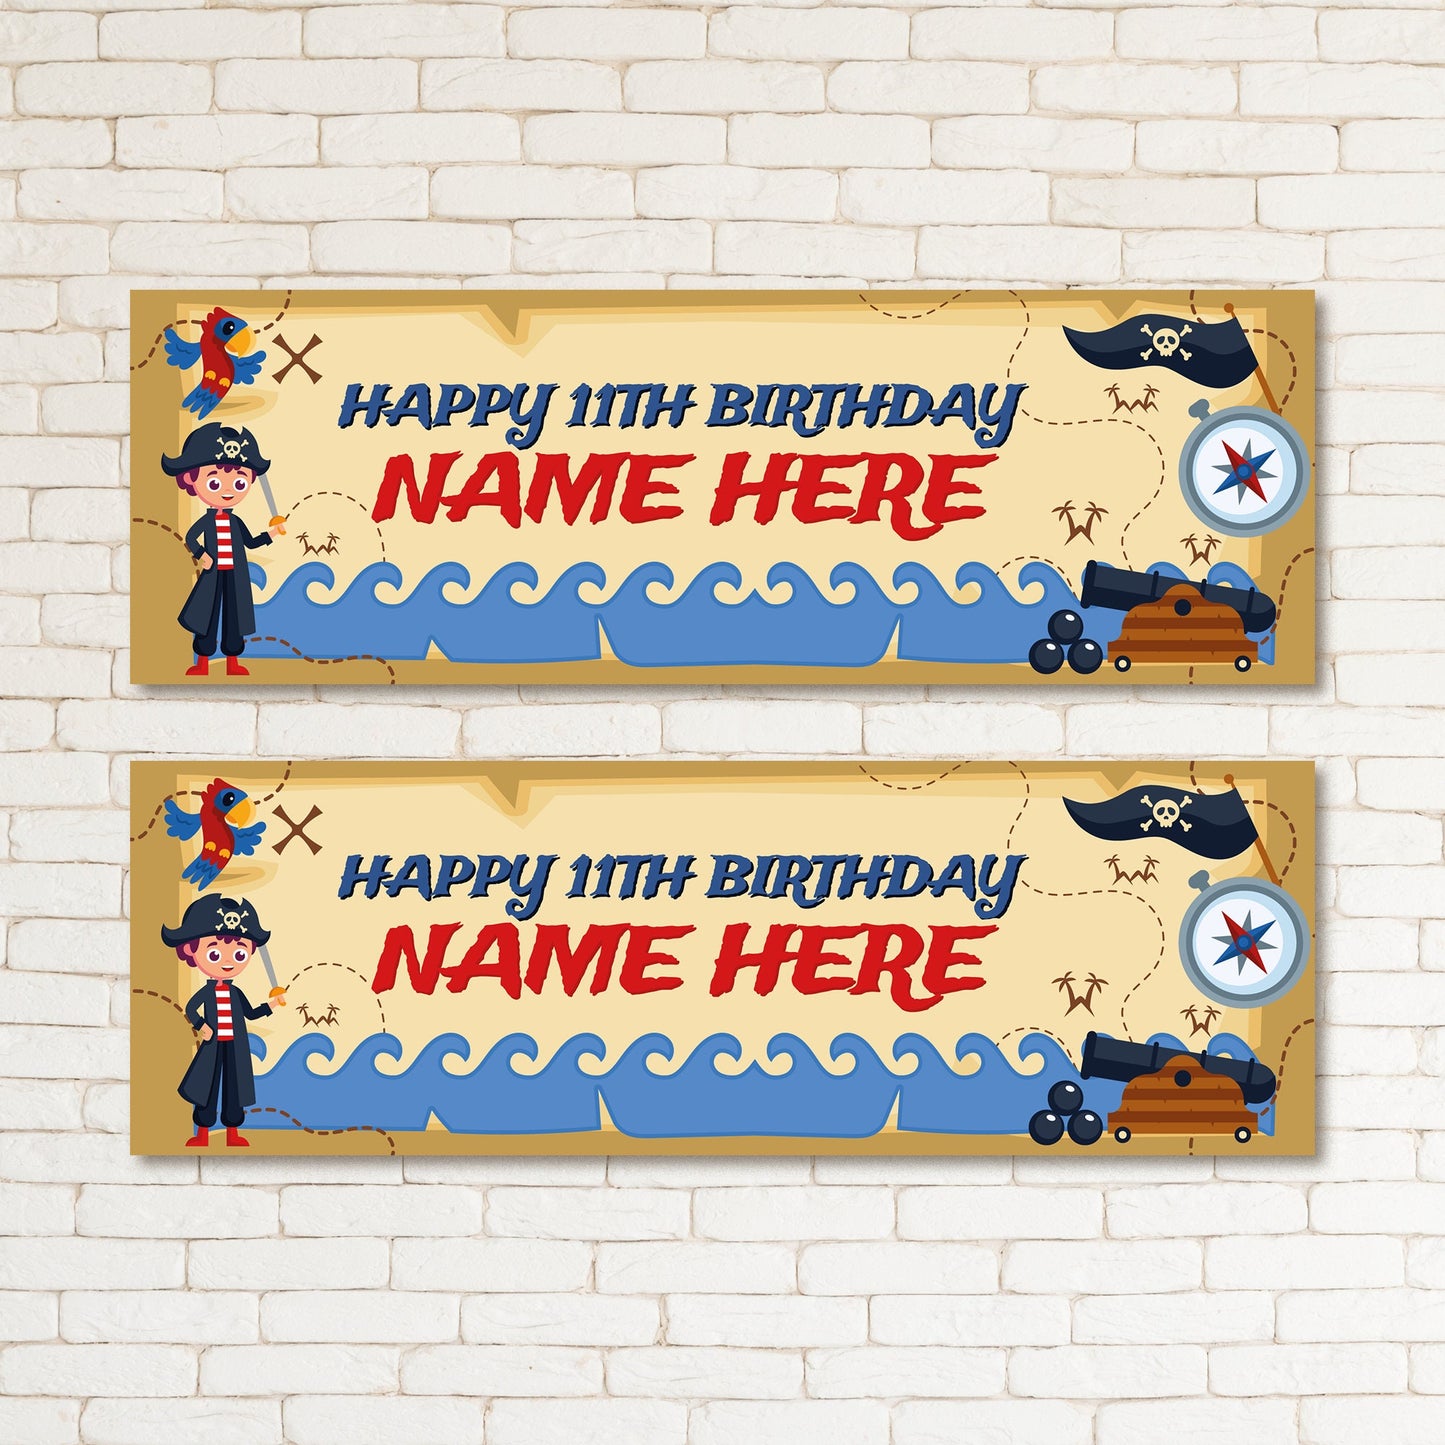 Set of 2 Personalised Birthday Banners - 16th 18th 21st 30th 40th 50th Birthday Party - Celebration - Occasion BBAN-0736